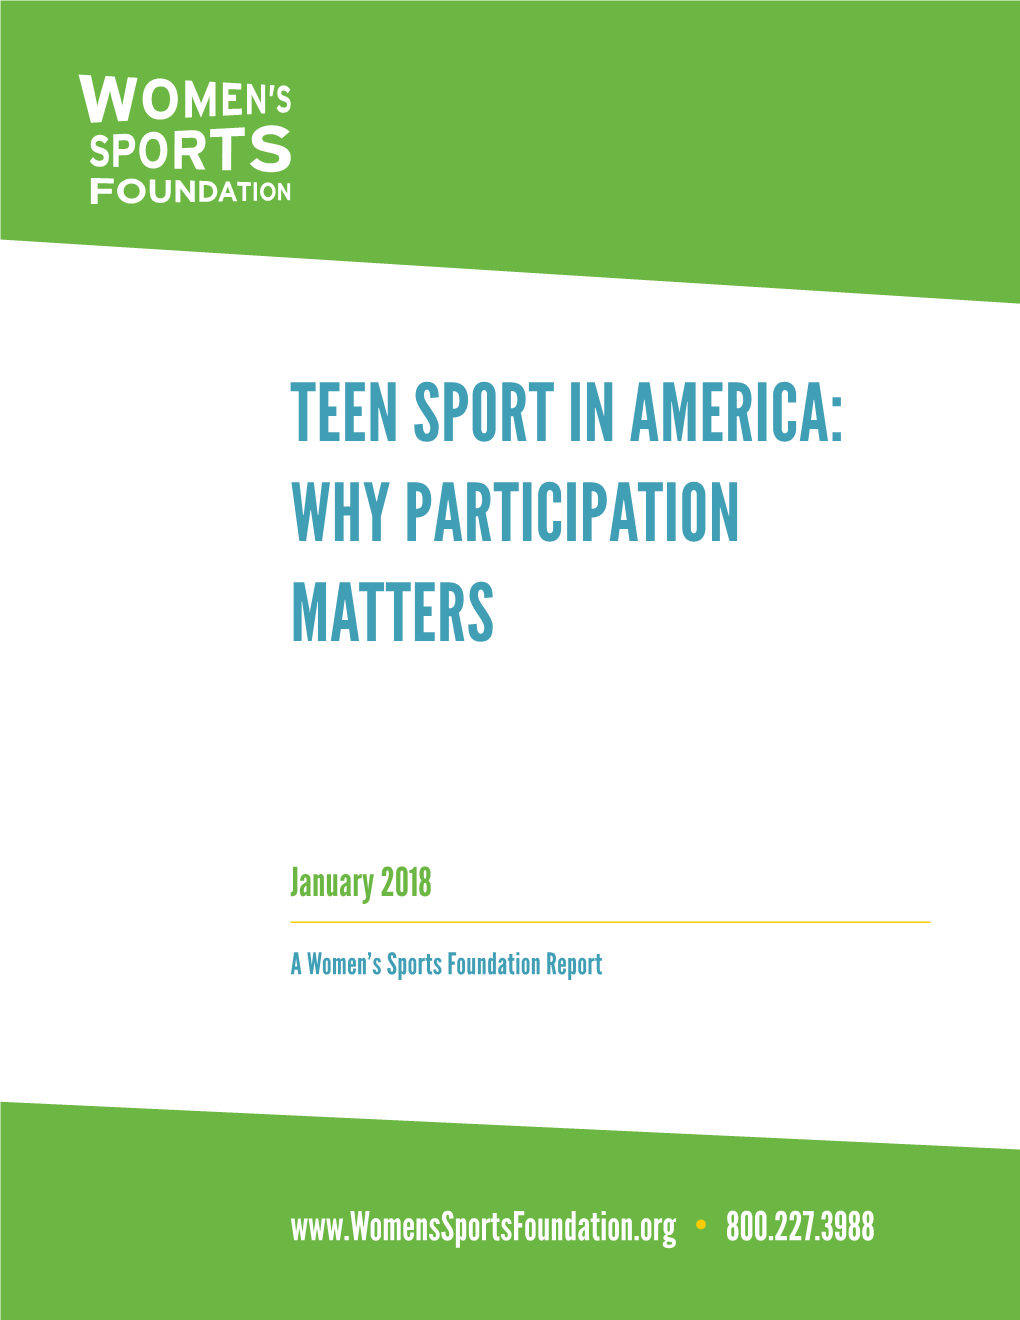 Teen Sport in America: Why Participation Matters